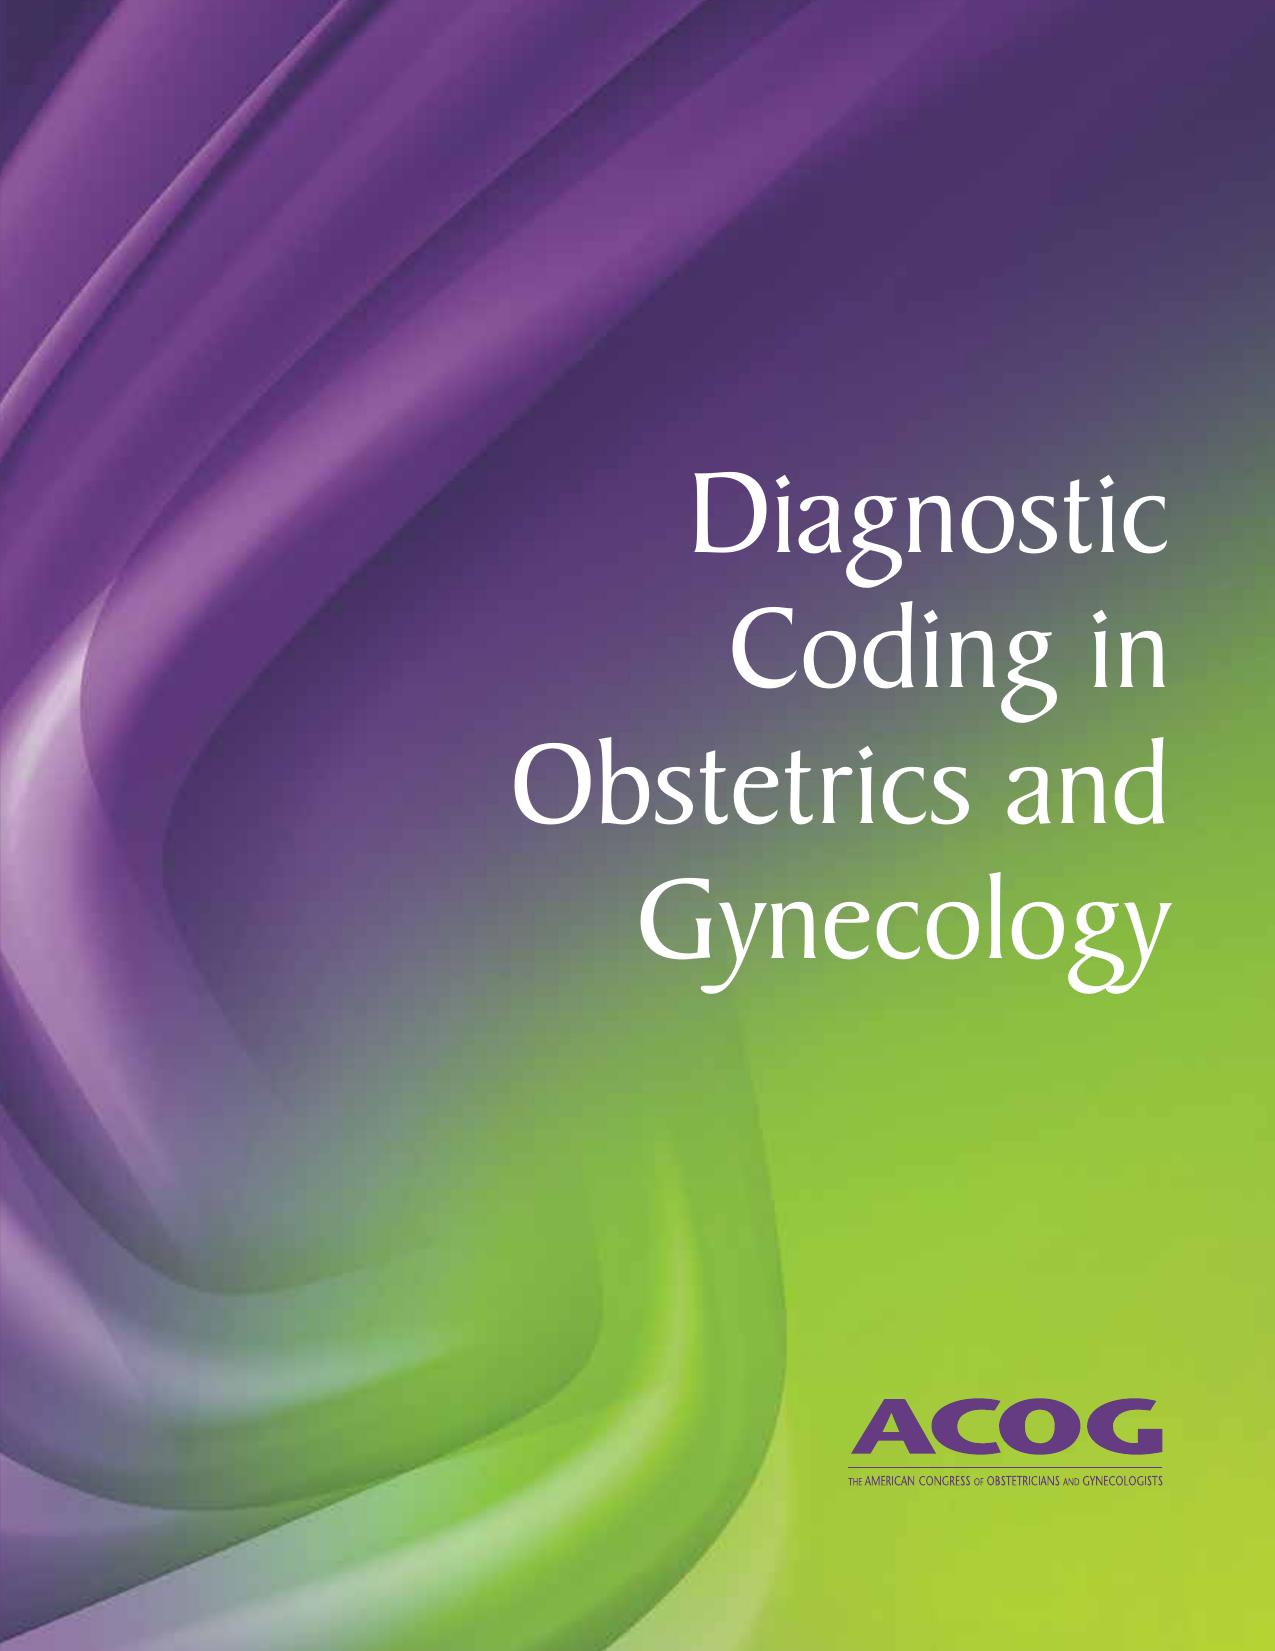 Diagnostic-Coding-Booklet-with-COVER-2016